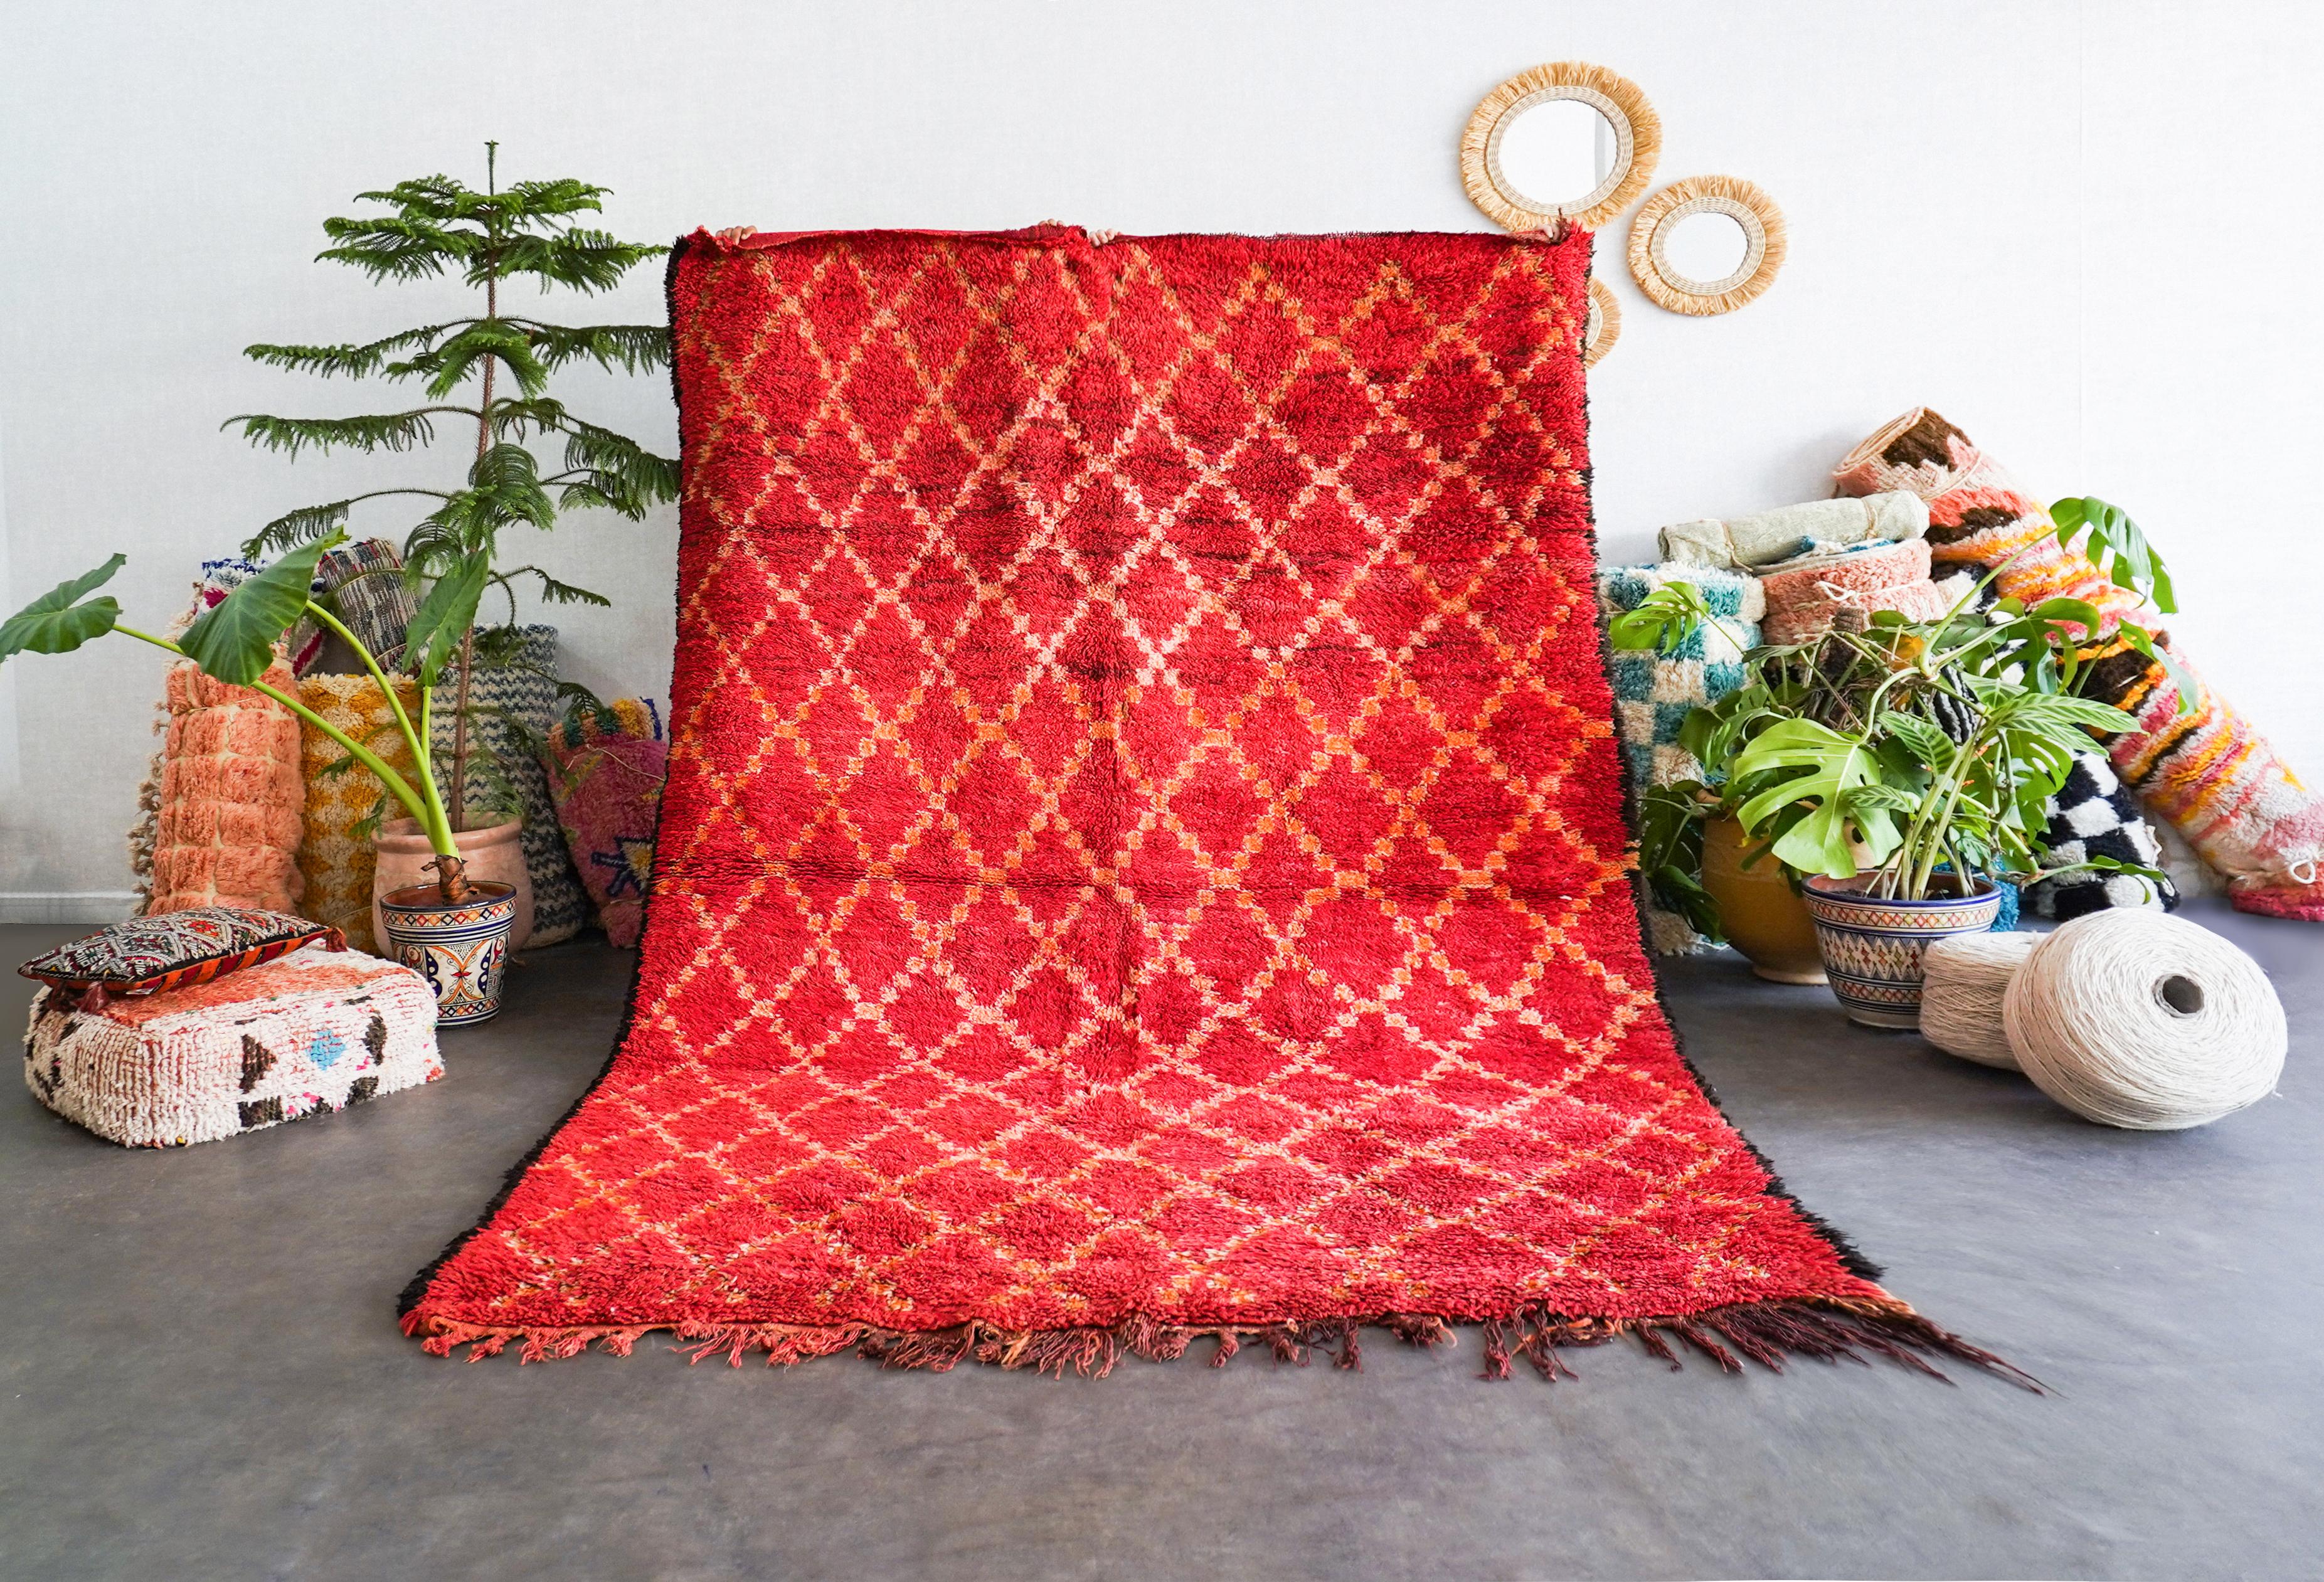 Uncover the rich heritage woven into our red Moroccan vintage rug. Handmade by skilled artisans using time-tested techniques, each Berber rug is a unique narrative, echoing the cultural tapestry of Morocco. With intricate geometric patterns and a